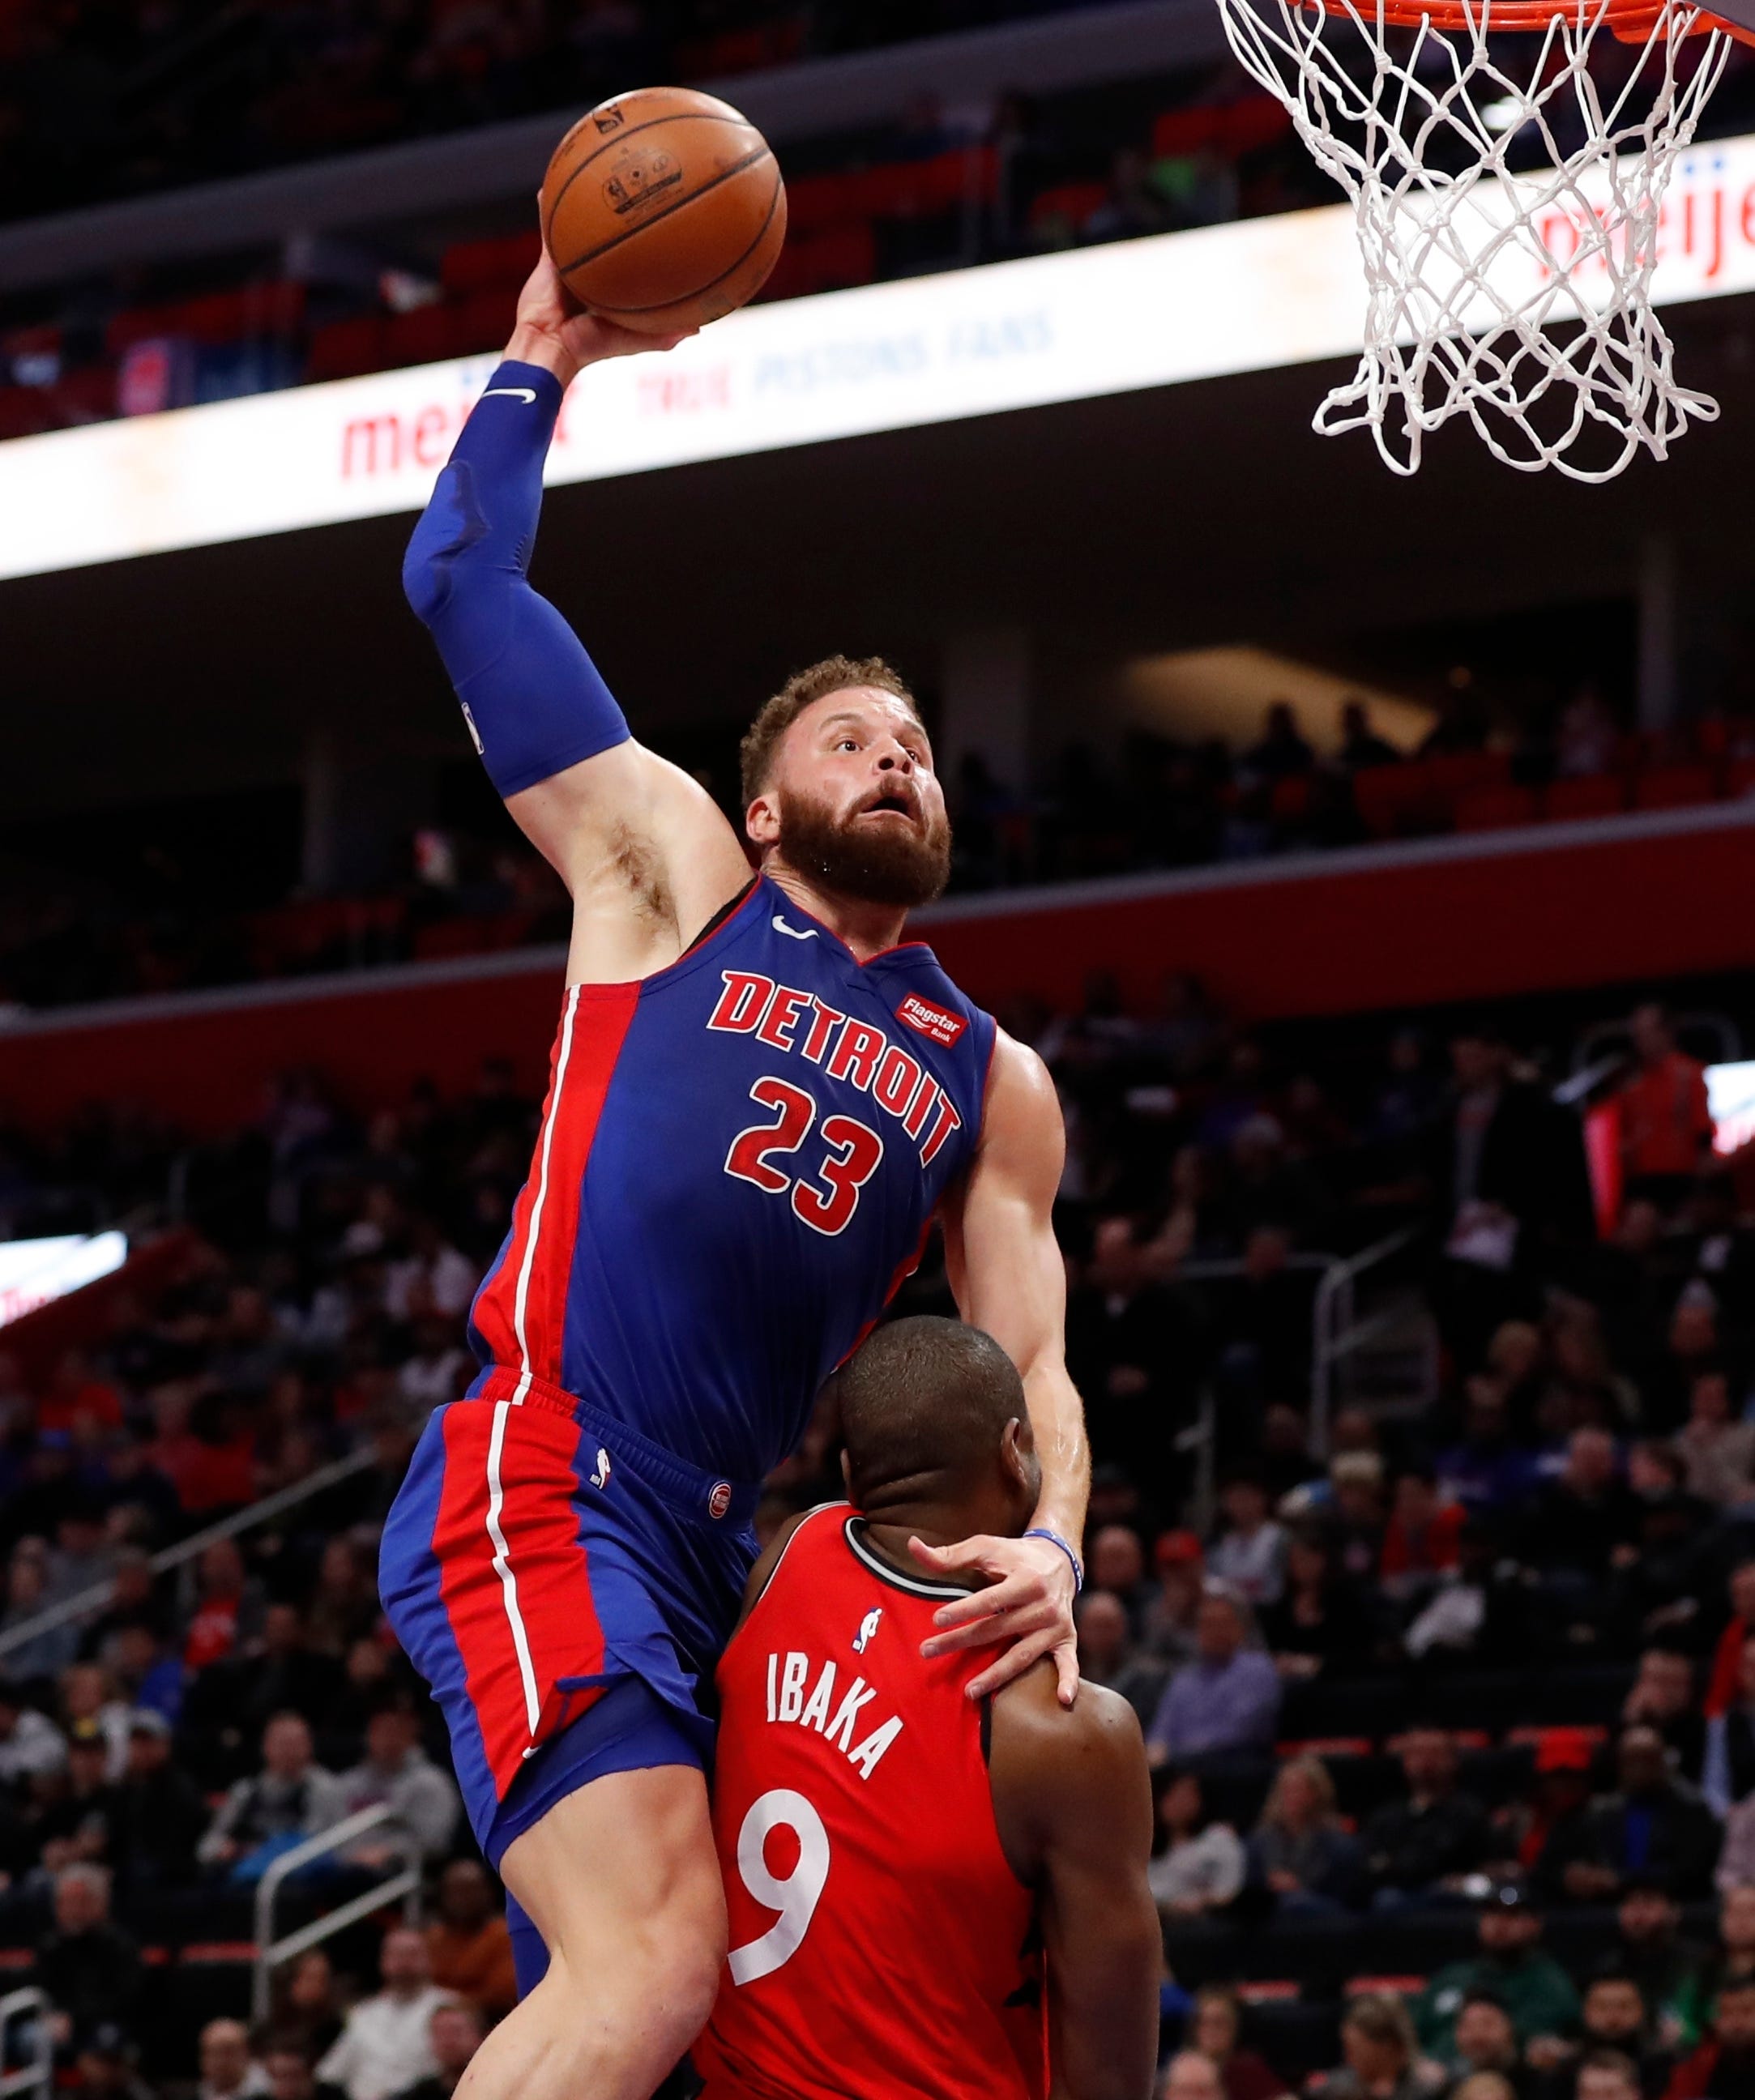 Detroit Pistons forward Blake Griffin (23) goes for a dunk over Toronto Raptors center Serge Ibaka (9) during the first half of an NBA basketball game, Sunday, March 3, 2019, in Detroit.